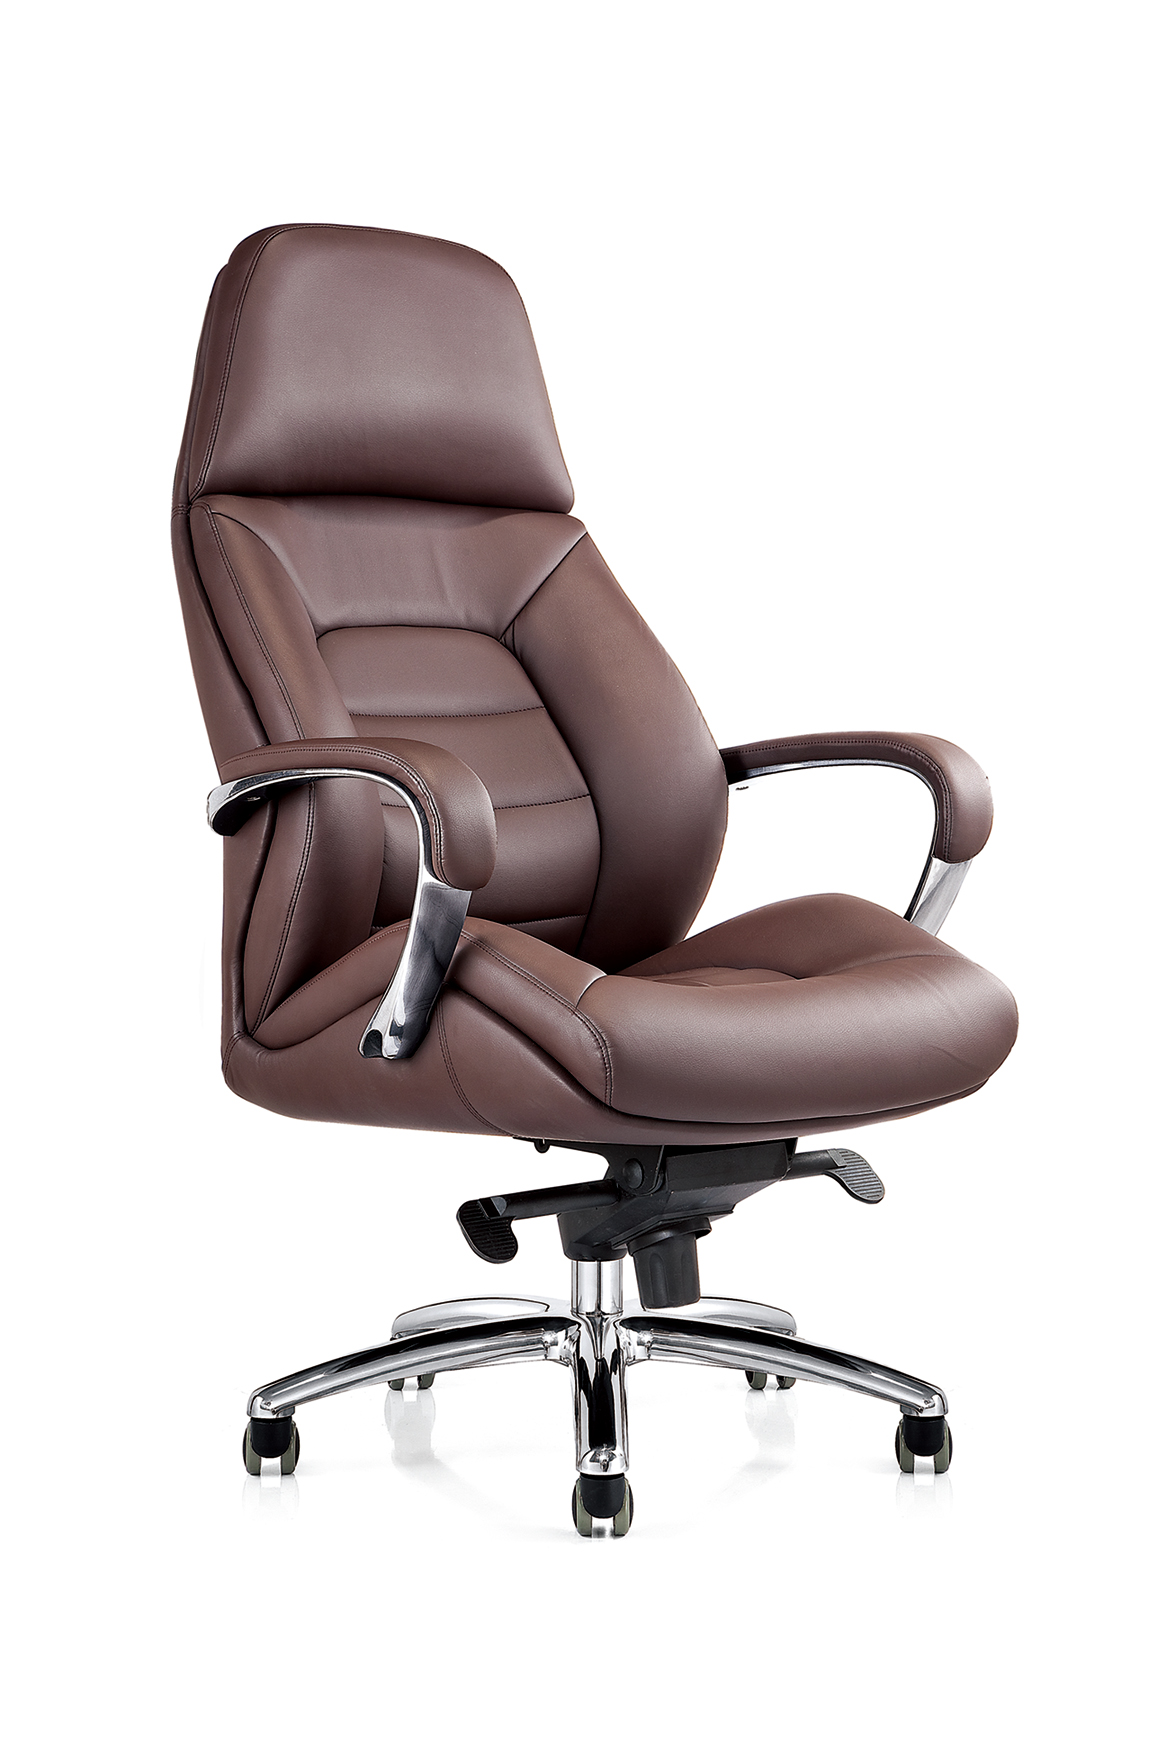 Pu Leather Rocking Office Chair Manufacturer In Foshan China By Foshan Furicco Furniture Co Ltd Id 1413944